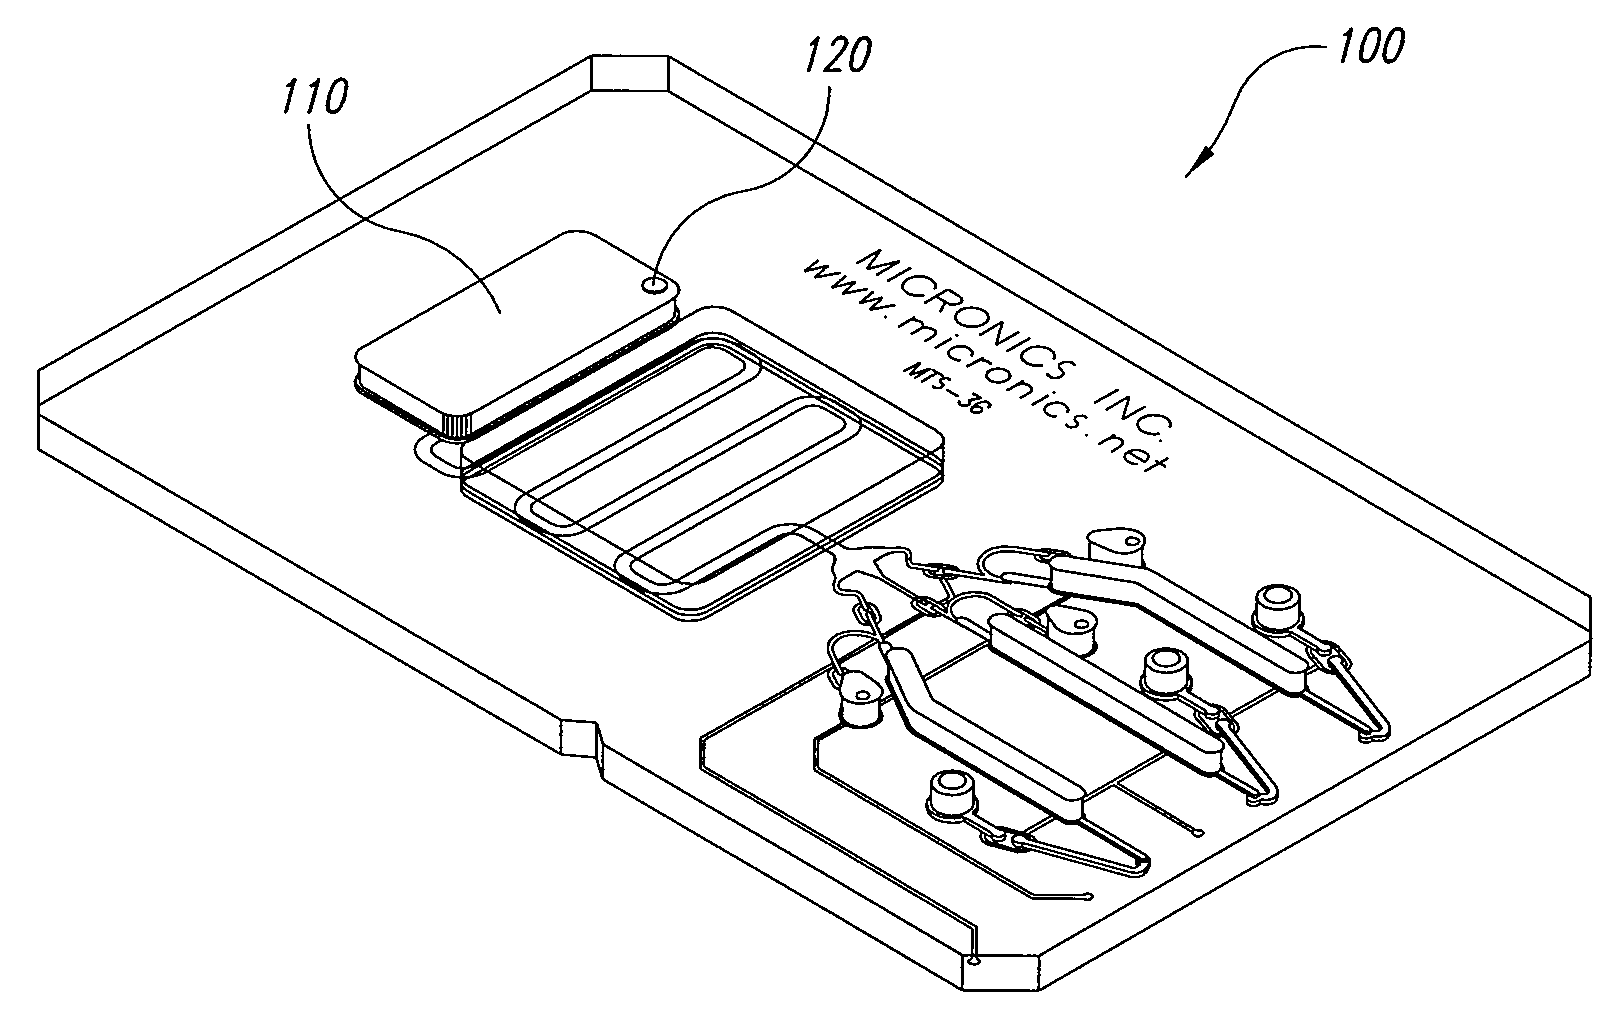 System and method for heating, cooling and heat cycling on microfluidic device